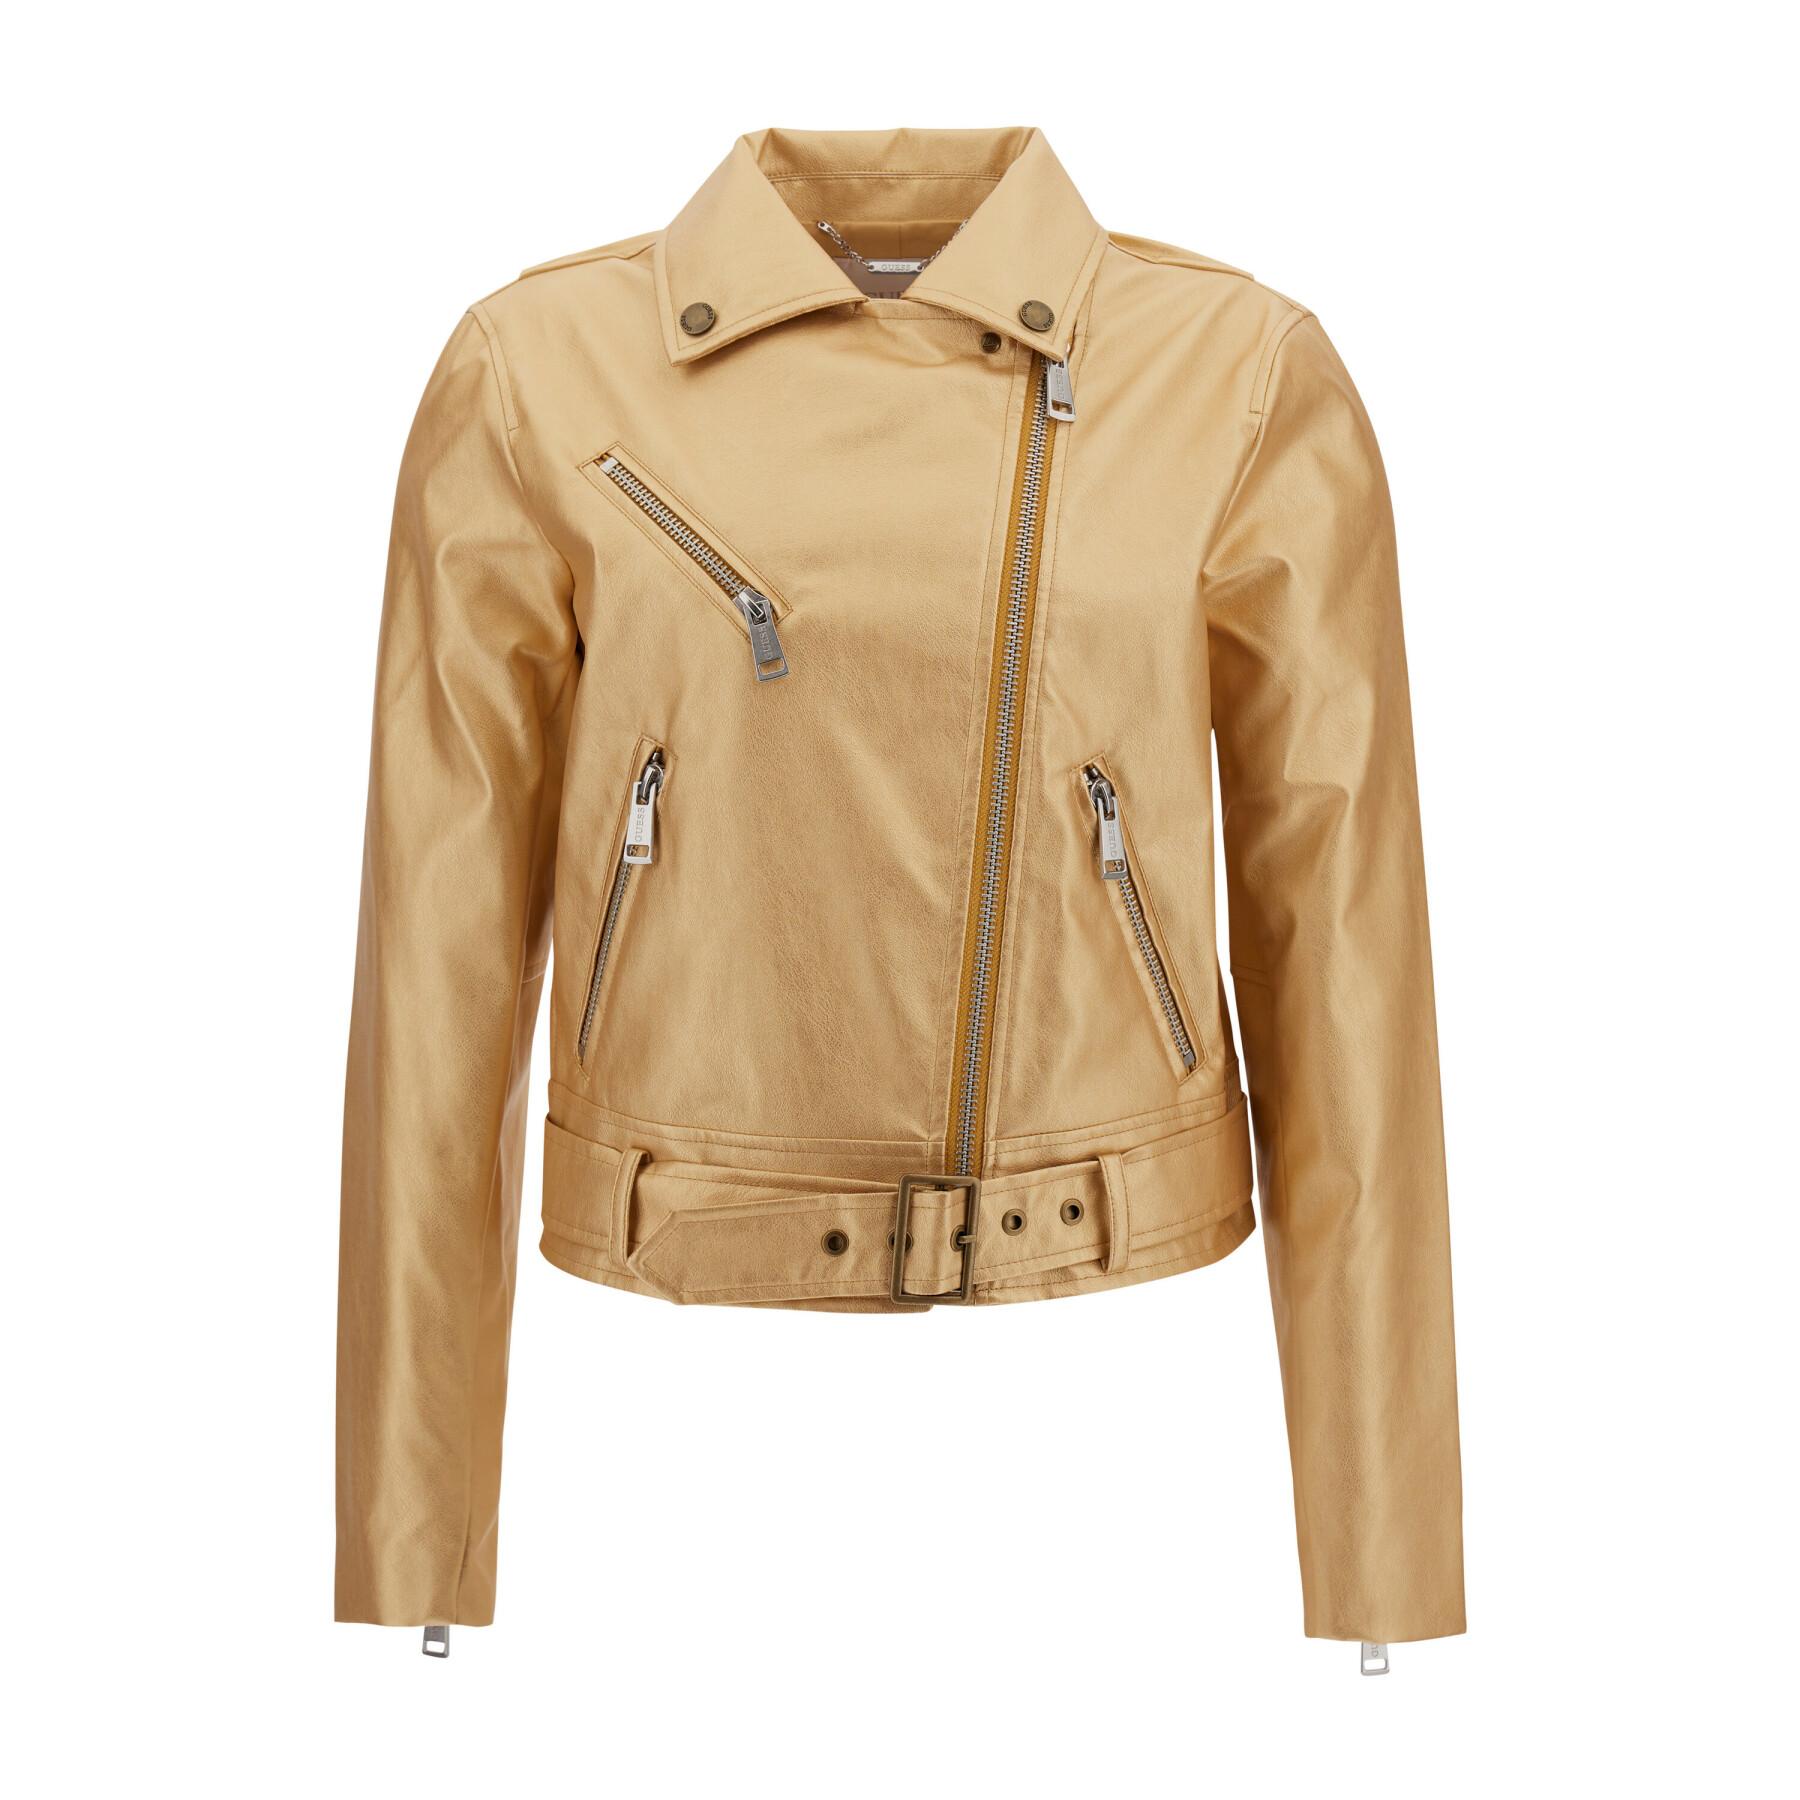 Leatherette motorcycle jacket for women Guess Lana